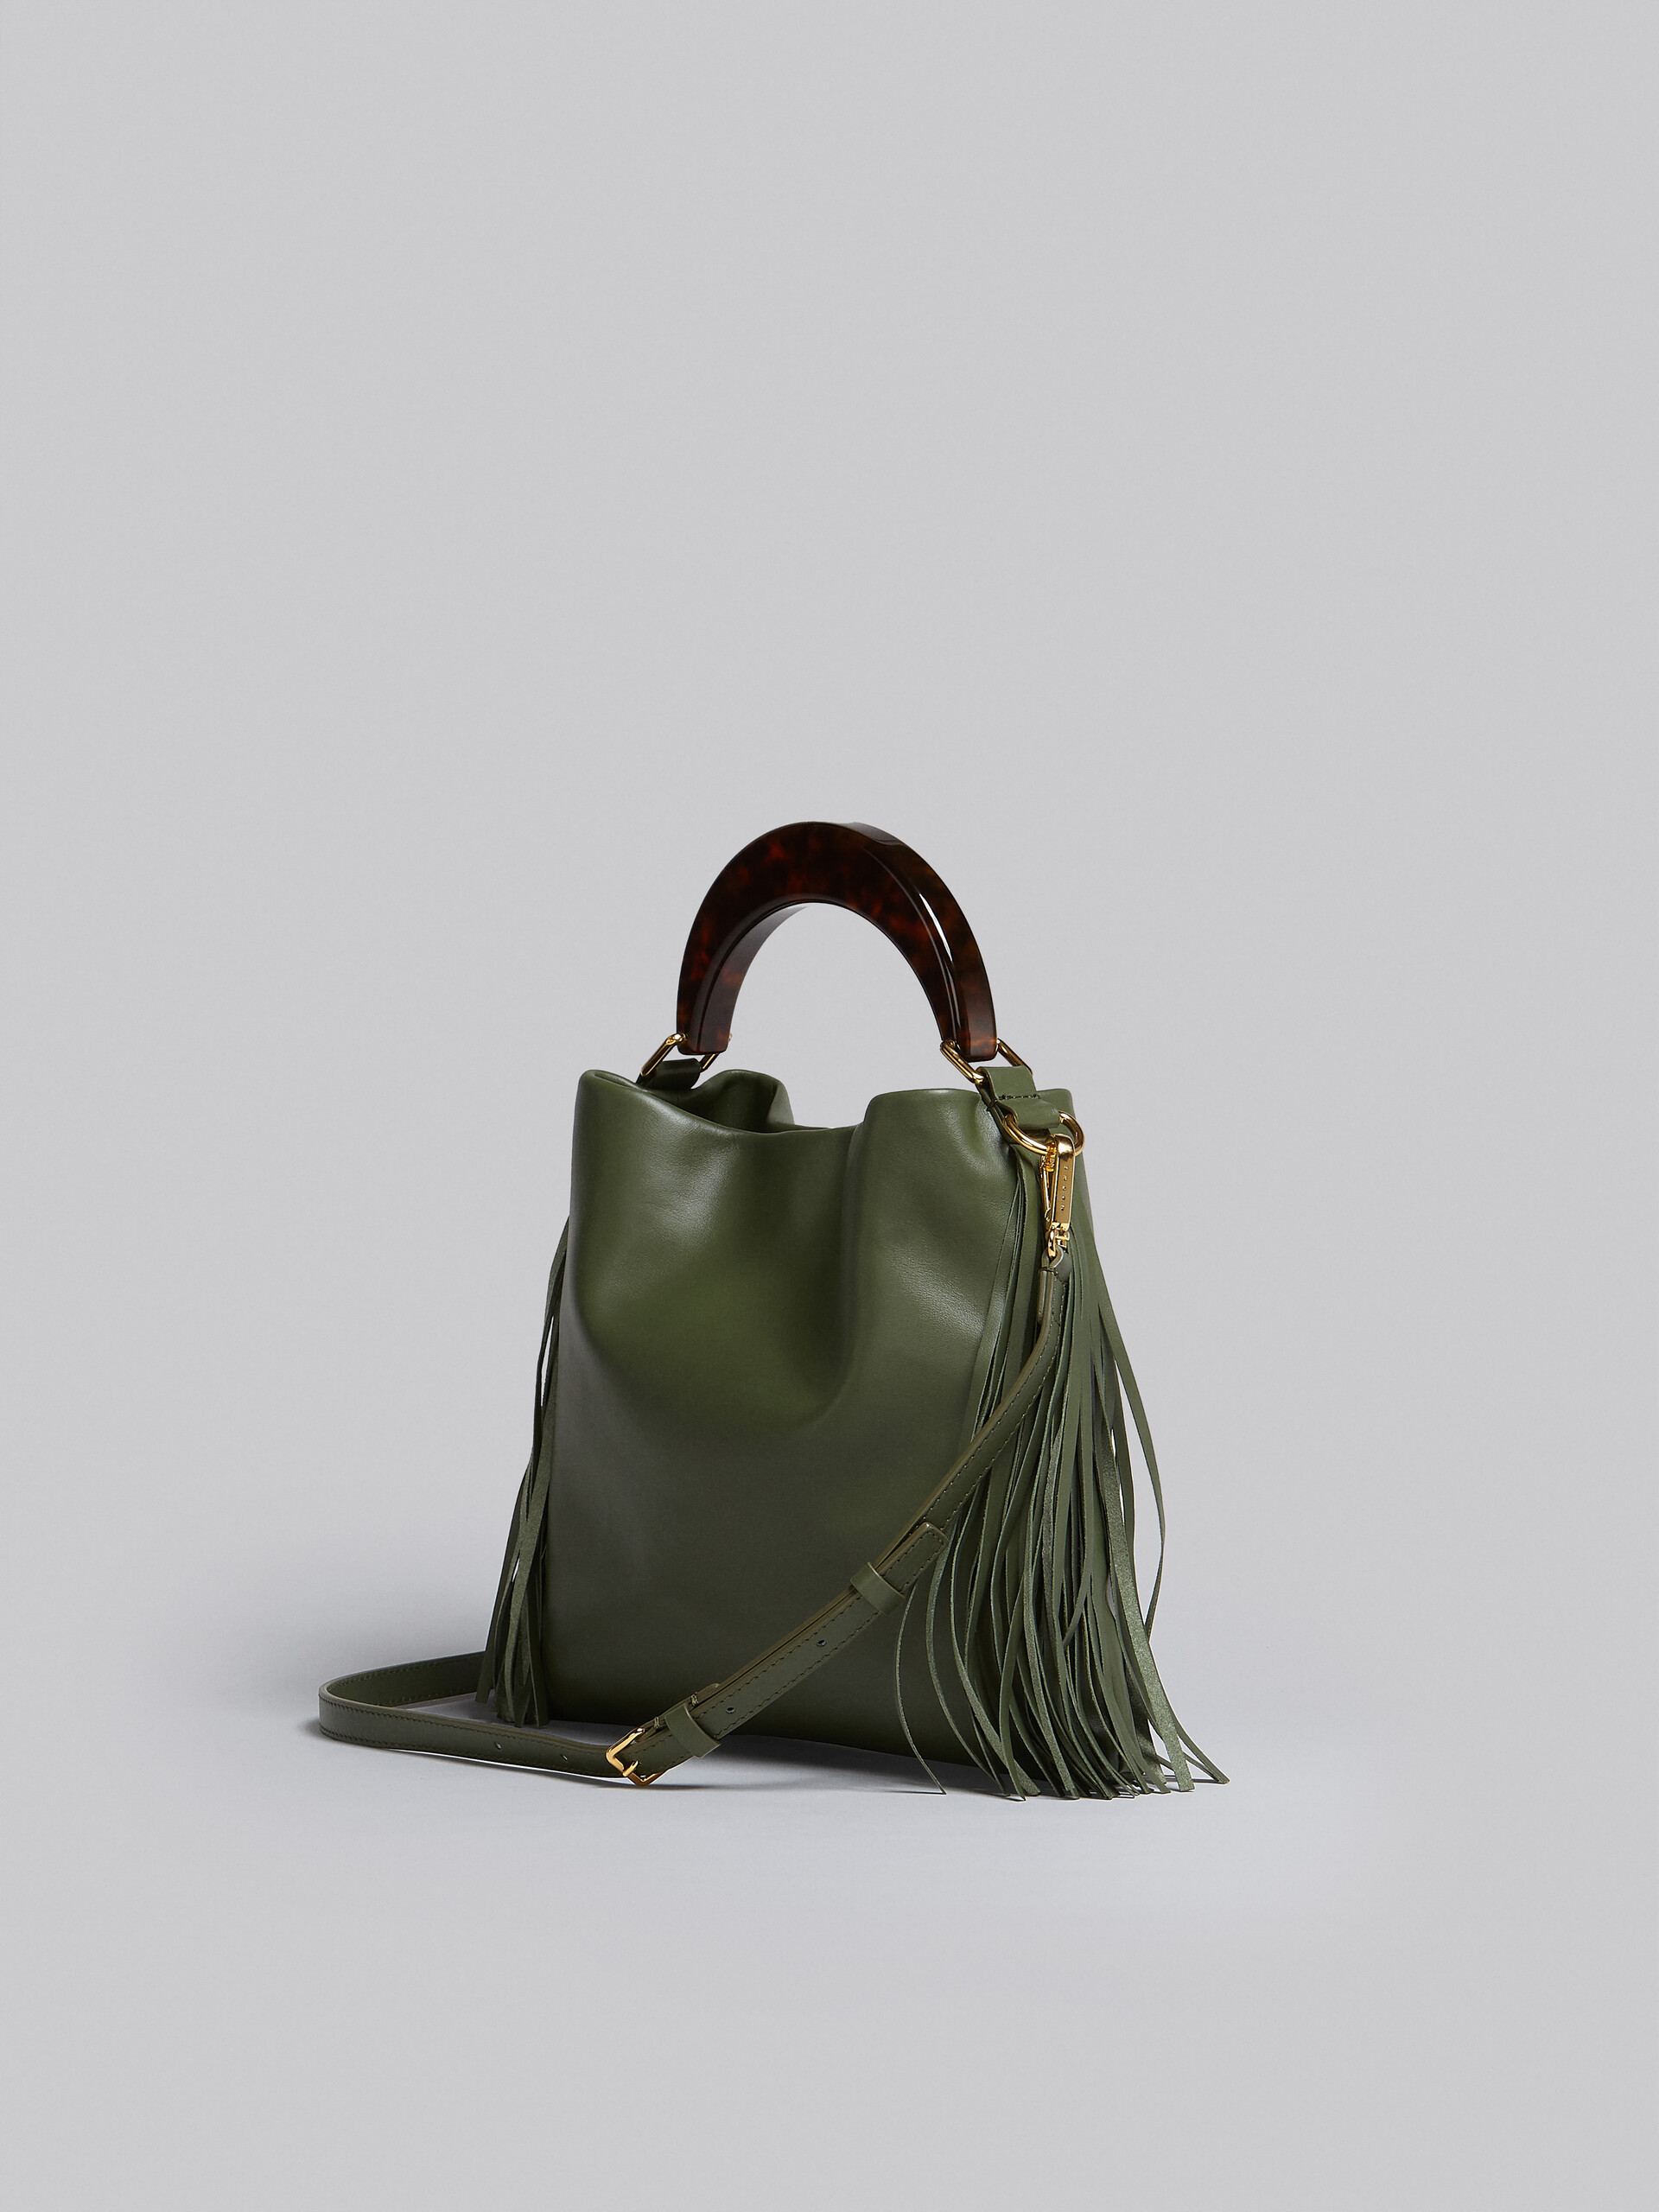 Venice Small Bag in green leather with fringes - Shoulder Bag - Image 2